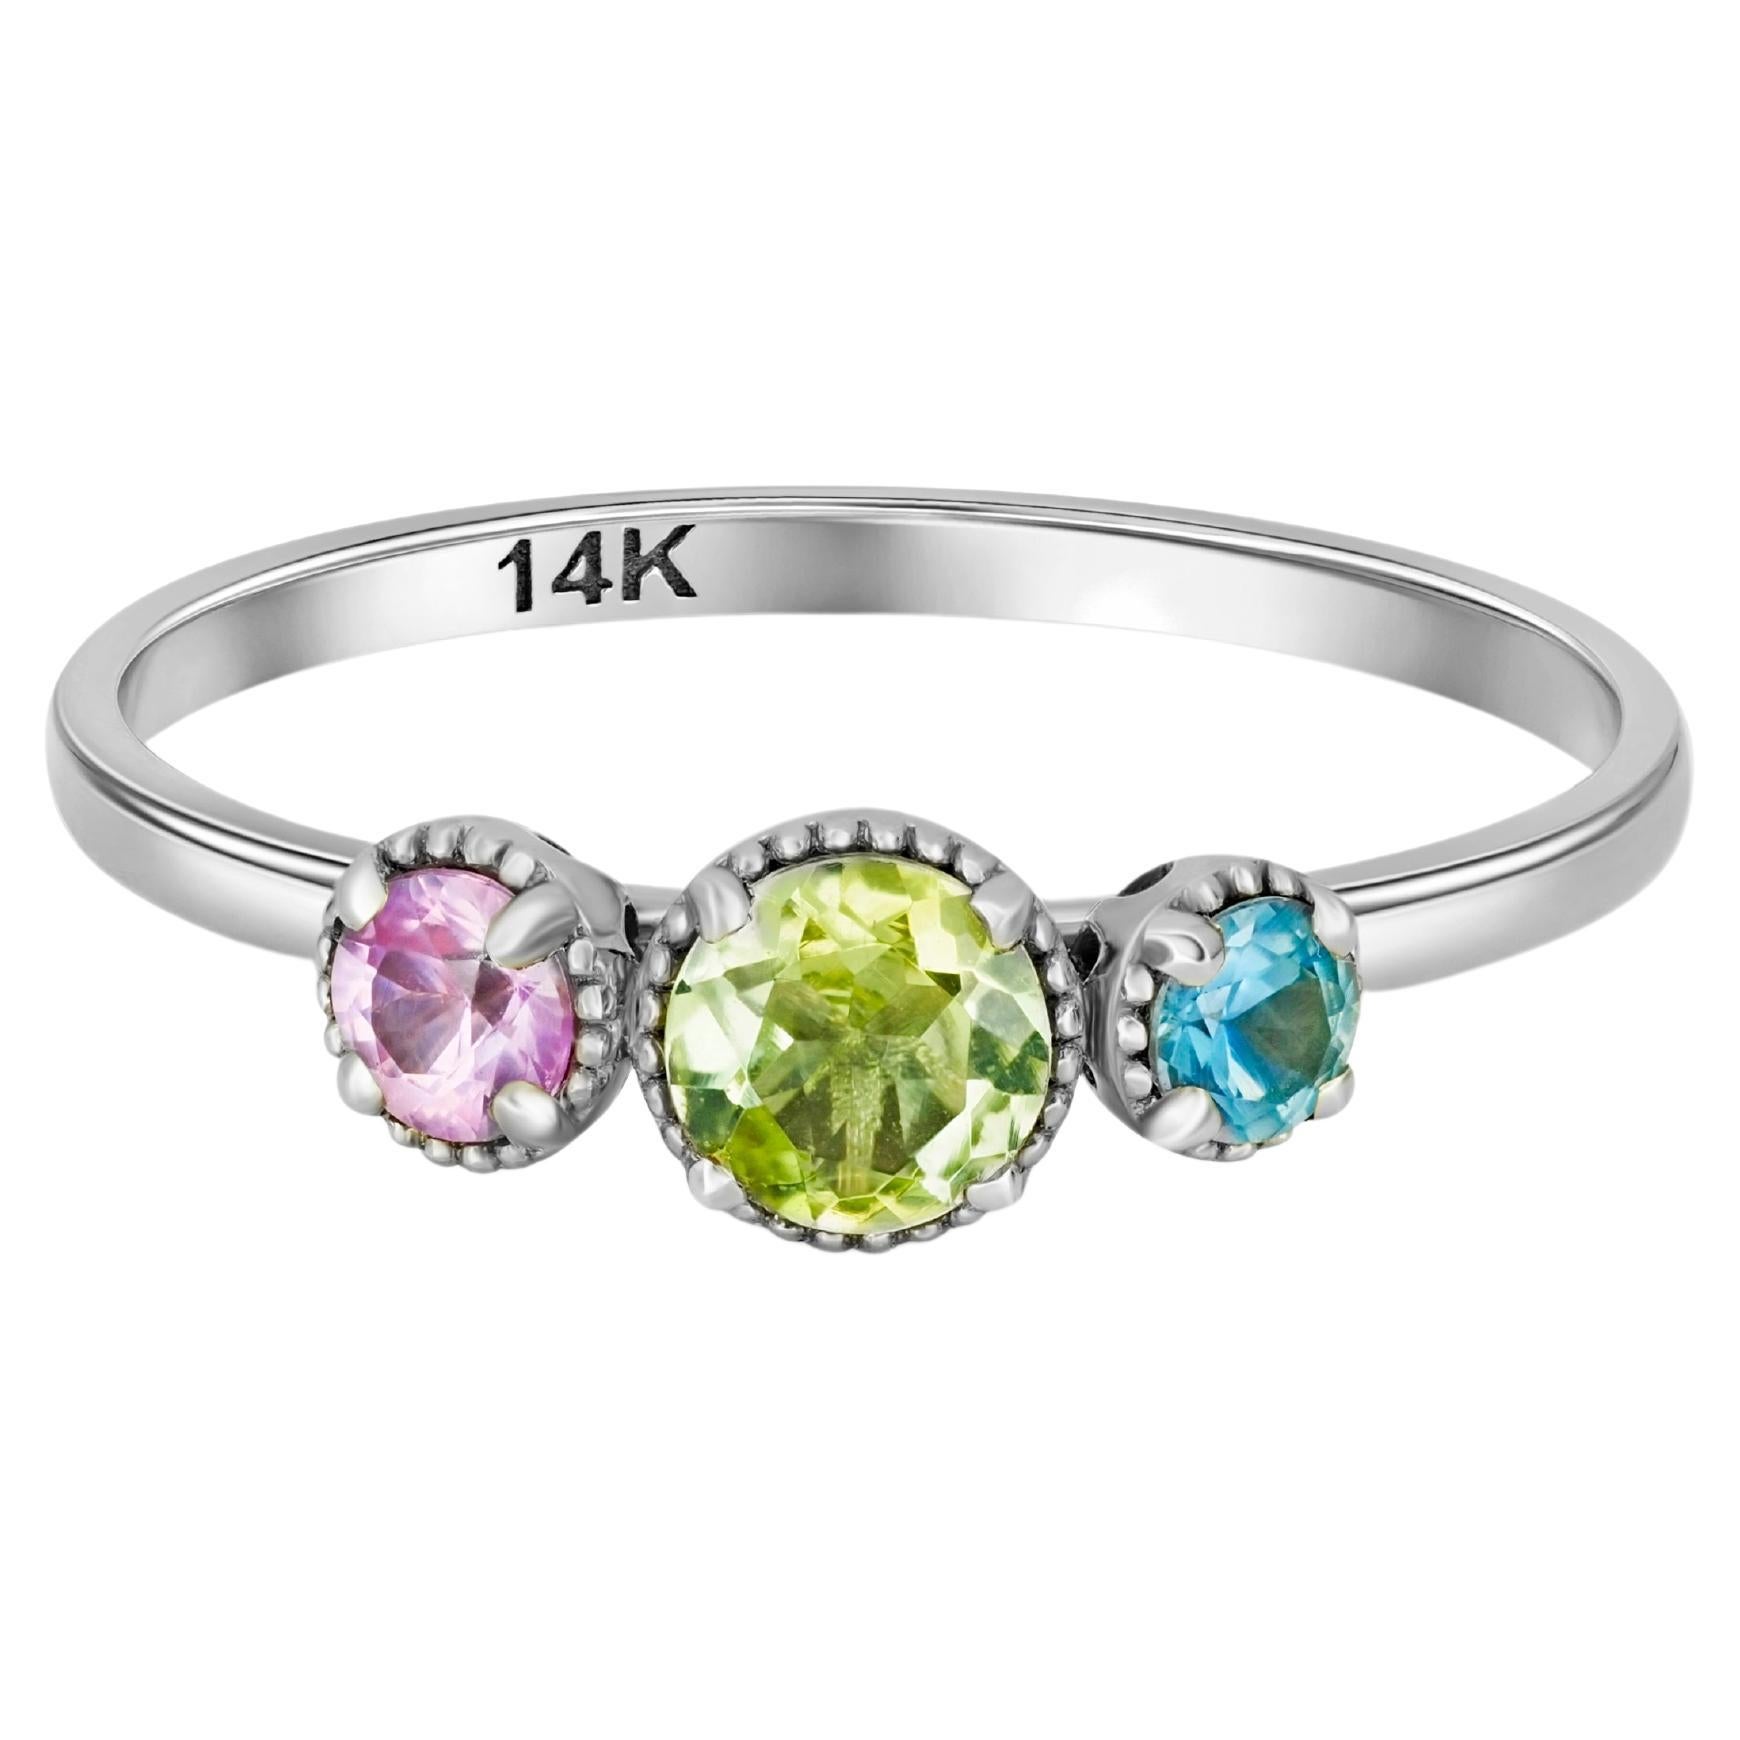 3 gemstone gold ring: sapphire, tourmaline. Three-Stone gold Rings


Weight: 1.50 g. 
Metal: 14k gold

Gemstones:

Sapphire: color - pink
round cut, 0.15 ct. approx
Clarity: Transparent with inclusions

Sapphire: color - blue
round cut, 0.08 ct.